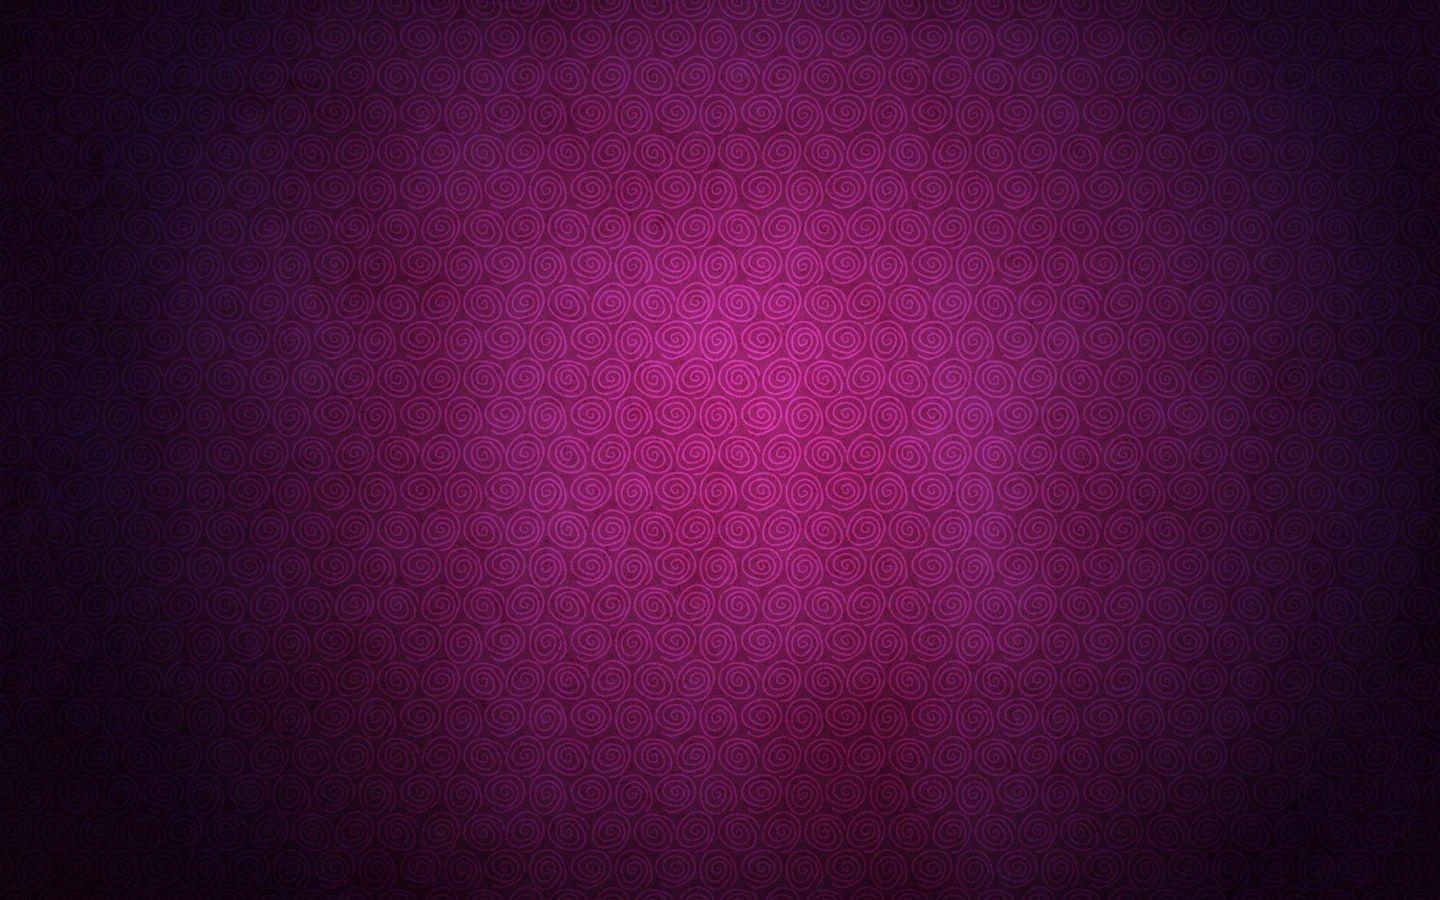 Abstract Wallpaper Pink Color Free Res 1440x900PX Wallpaper Pink